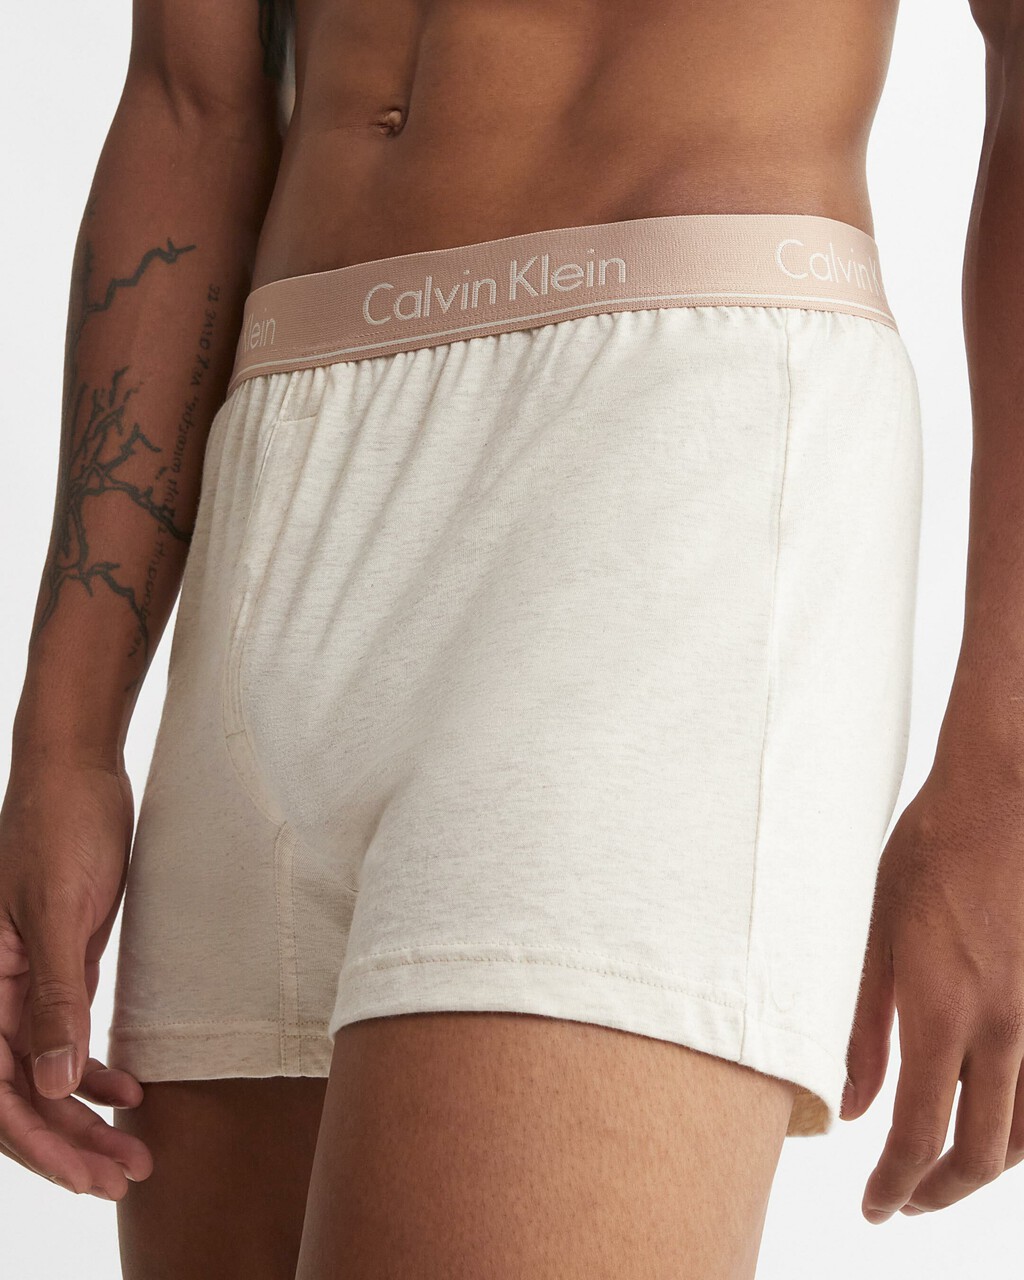 KNIT SLIM BOXERS, Oatmeal Heather, hi-res